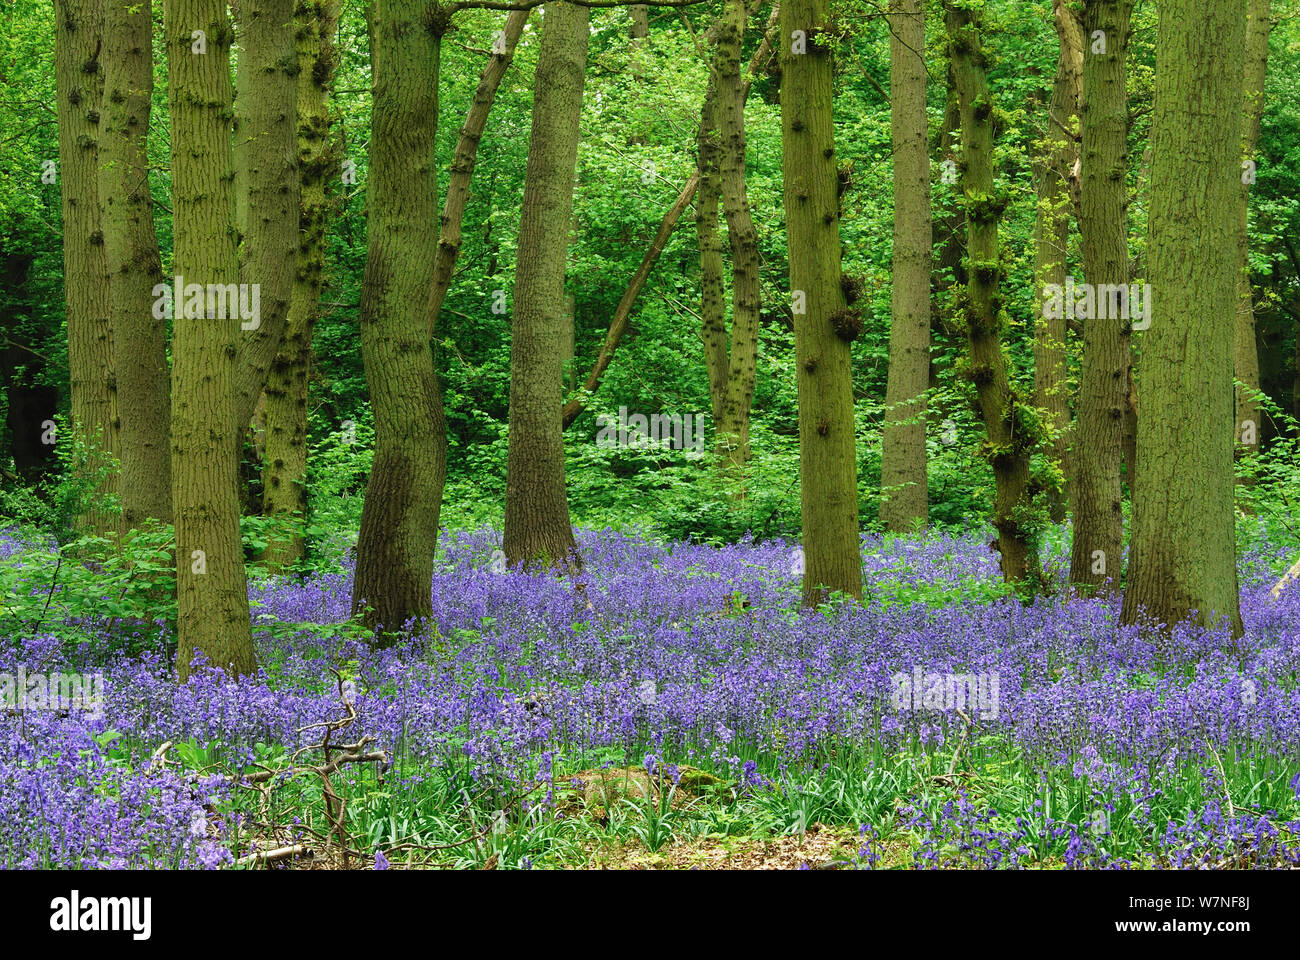 Bluebells (Hyacinthoides non-scripta) in flower, Hagbourne Copse Nature Reserve, Swindon, Wiltshire, England, UK, May 2010. Stock Photo